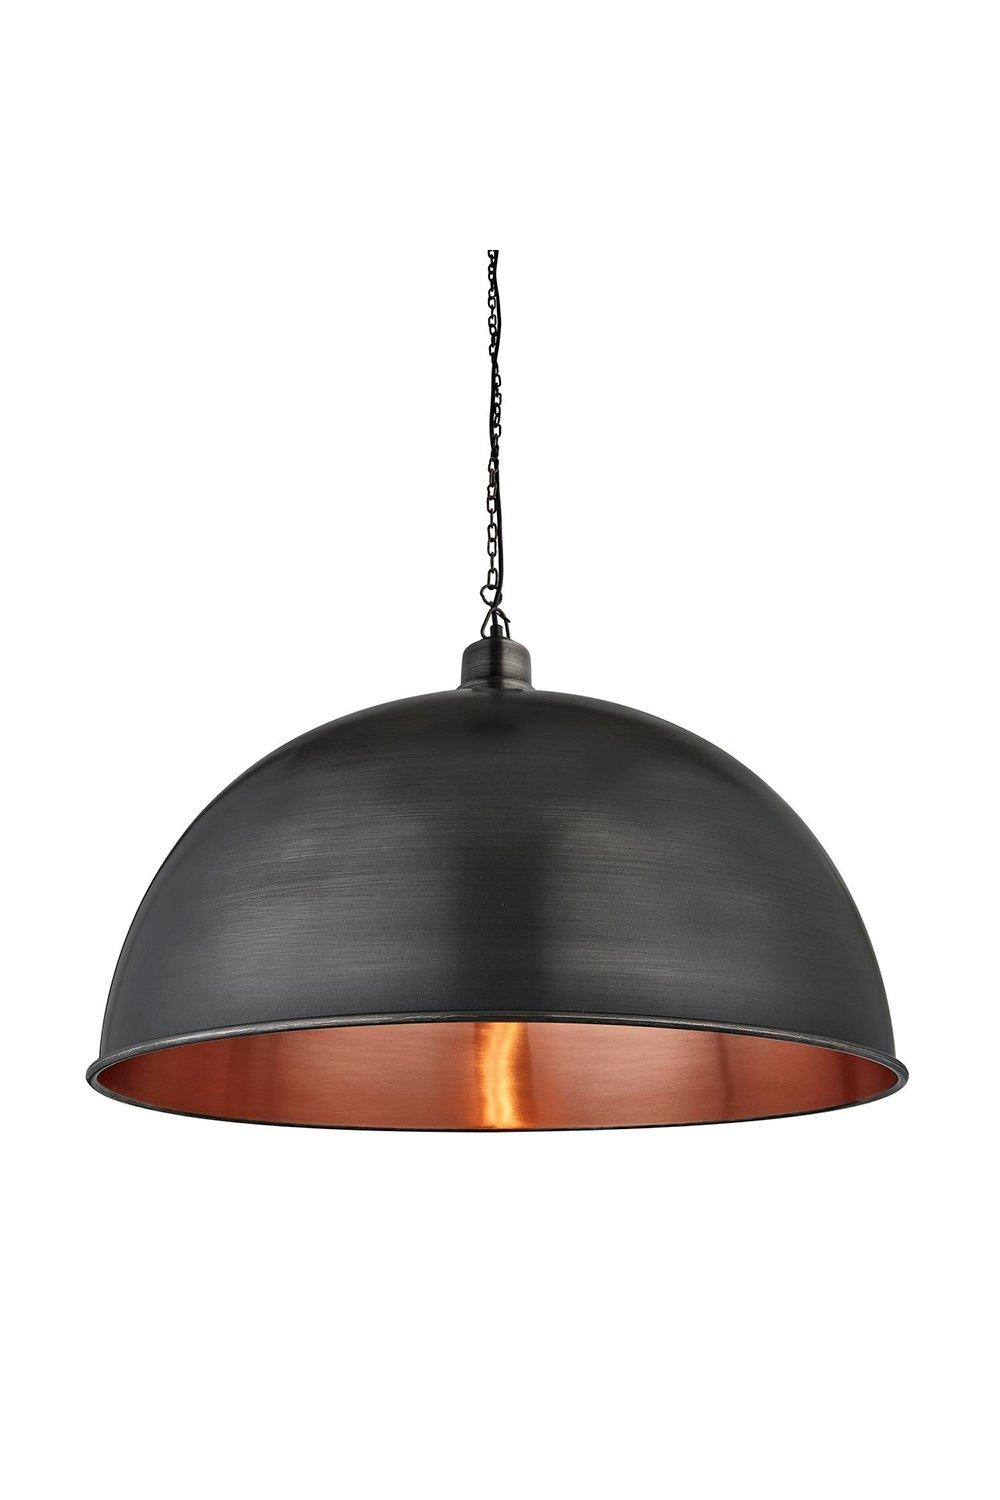 Brooklyn Giant Dome Pendant, 24 Inch, Pewter & Copper, Pewter Chain Holder